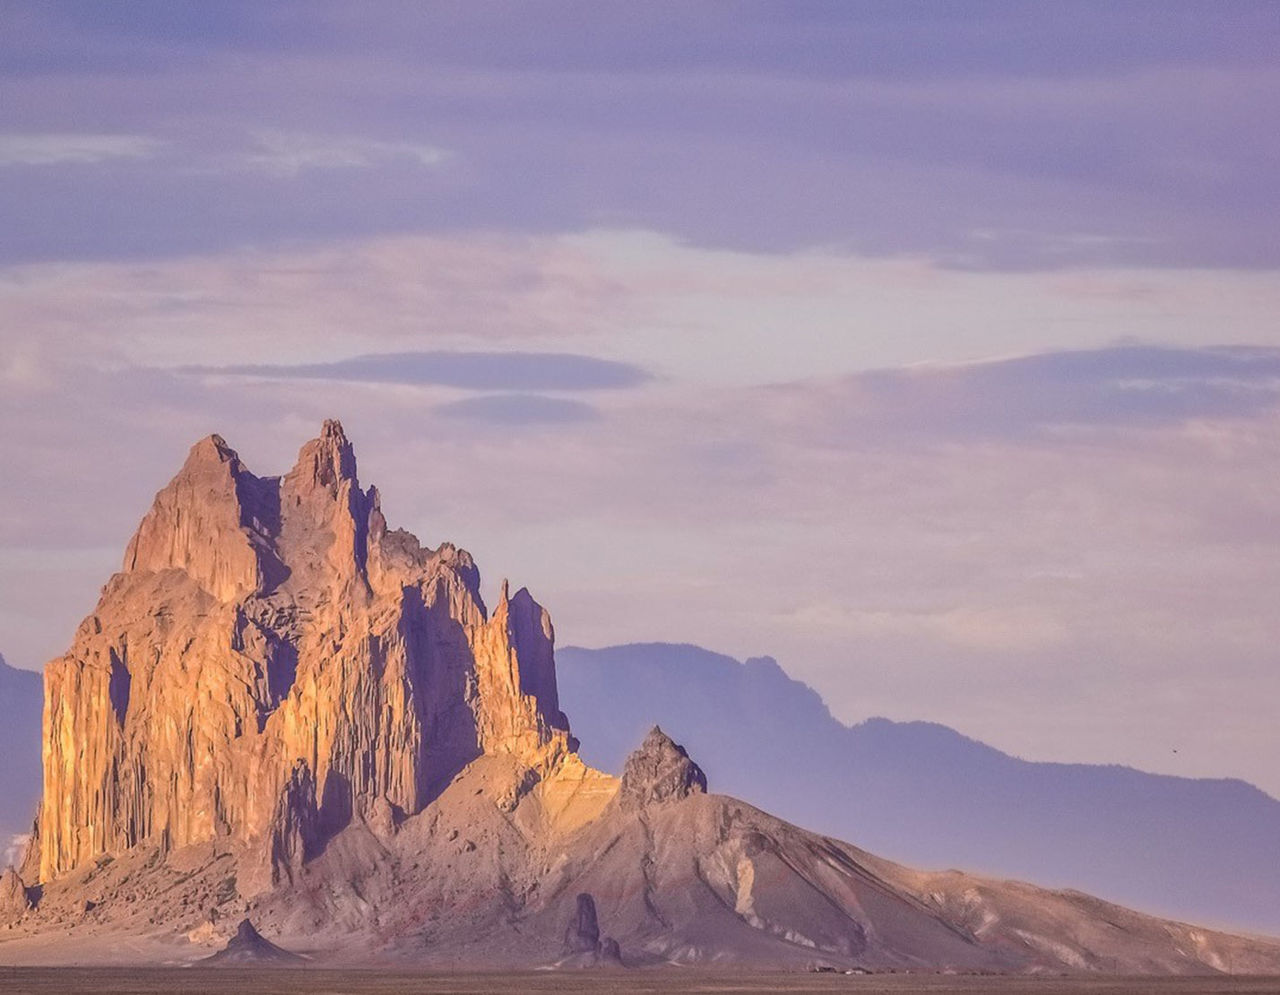 The Shiprock rock formation sitting above the desert at sunrise